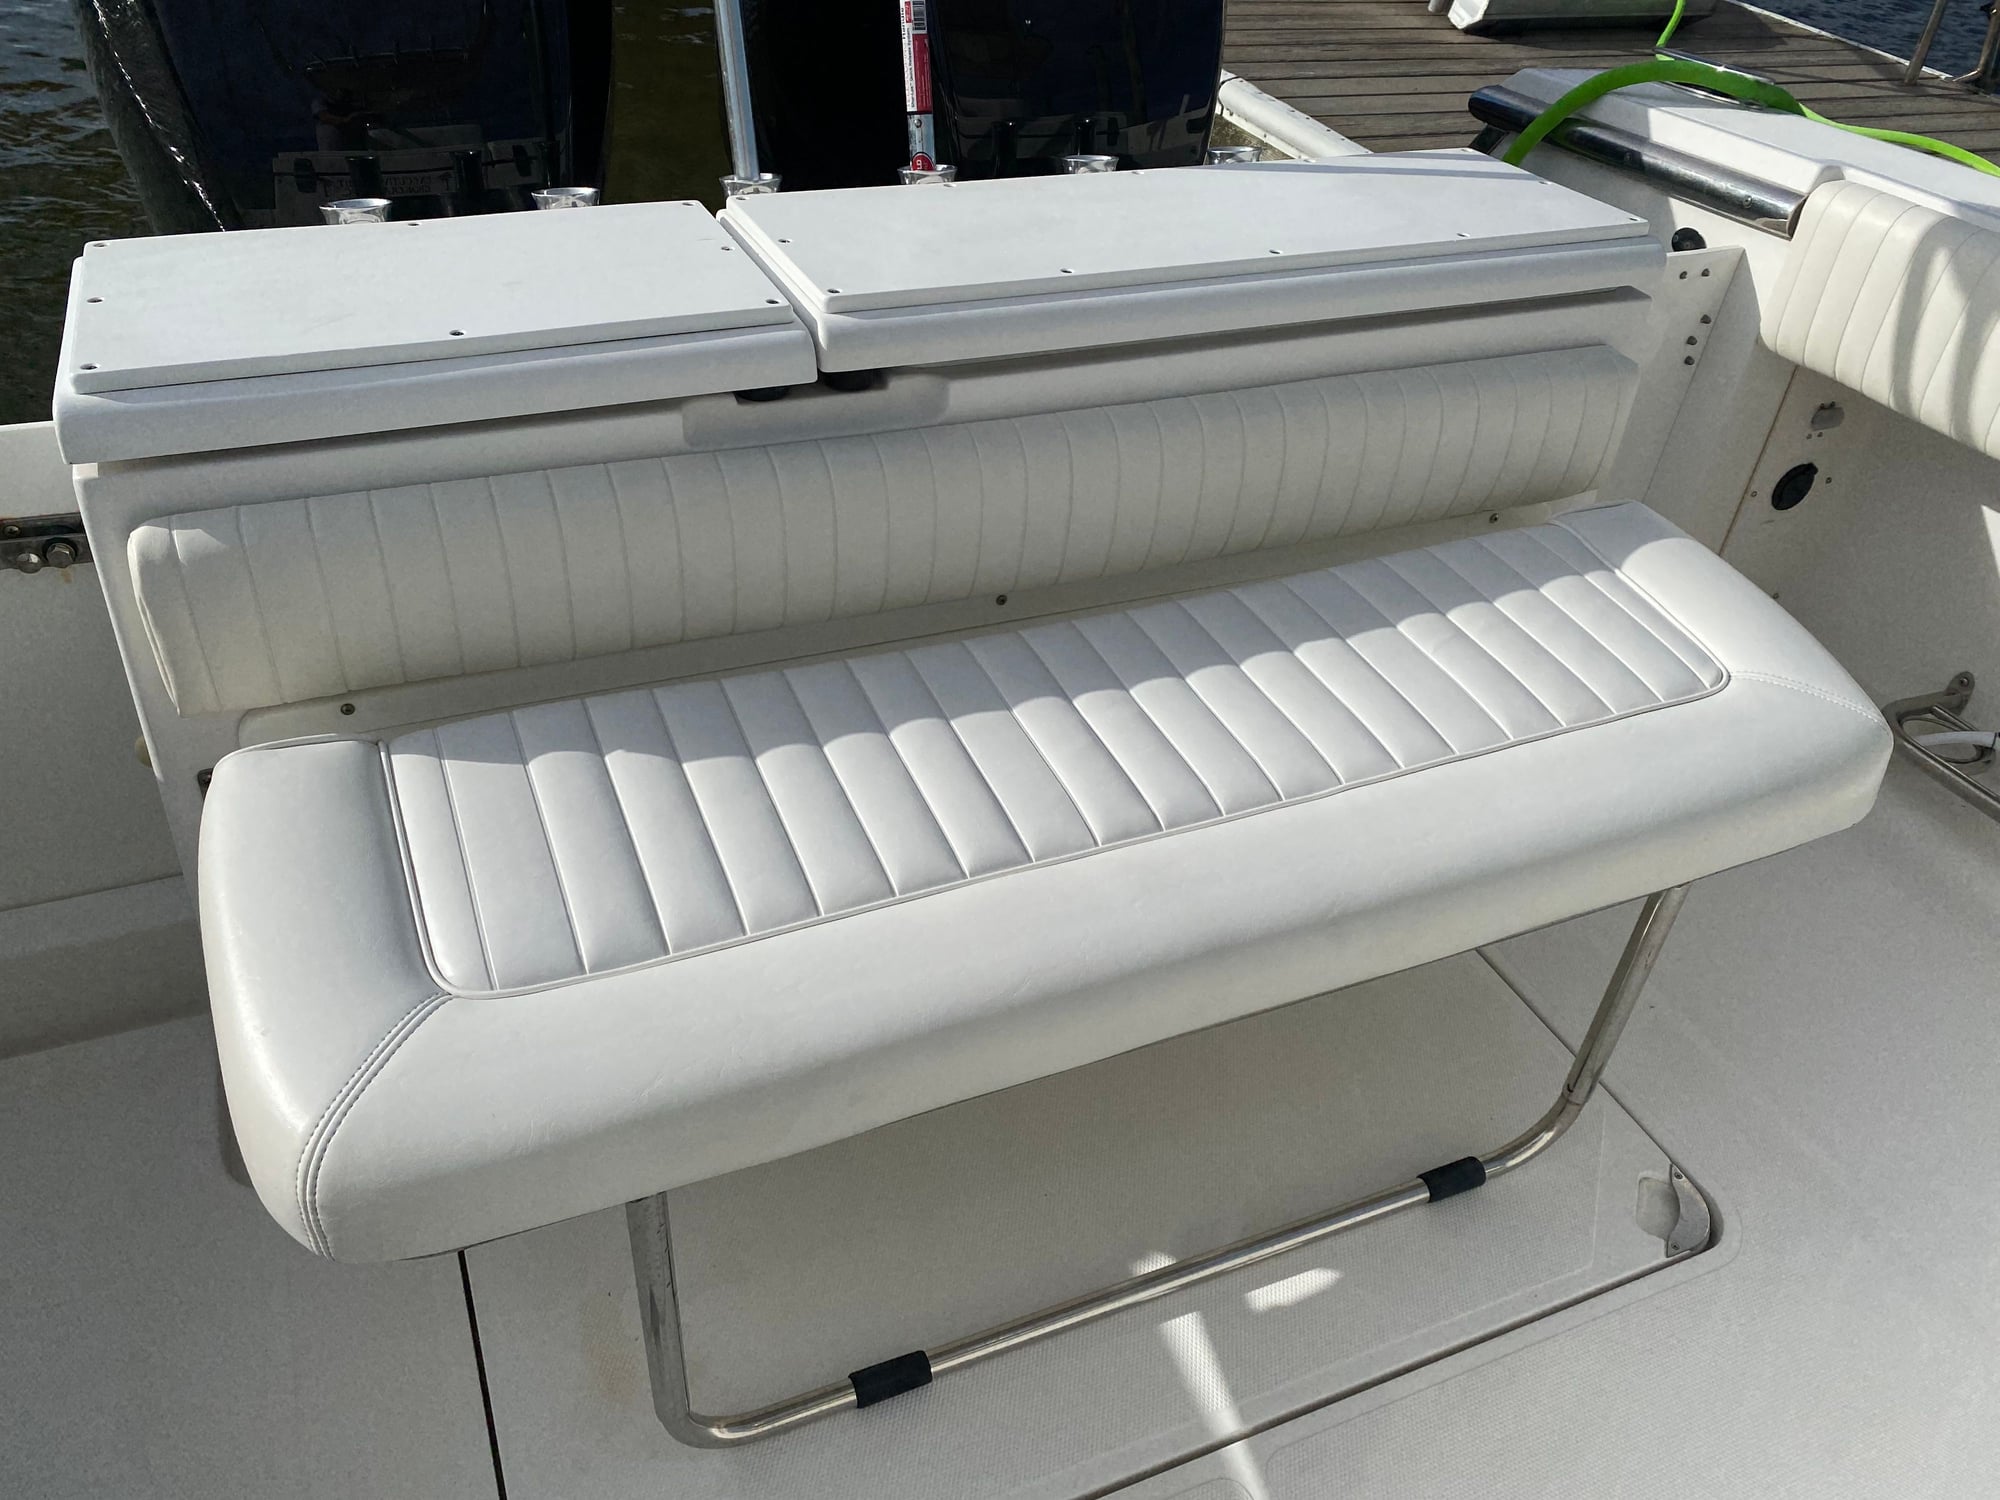 Xtreme Mildew Remover by Nautical One - Is The Hype Real? - The Hull Truth  - Boating and Fishing Forum